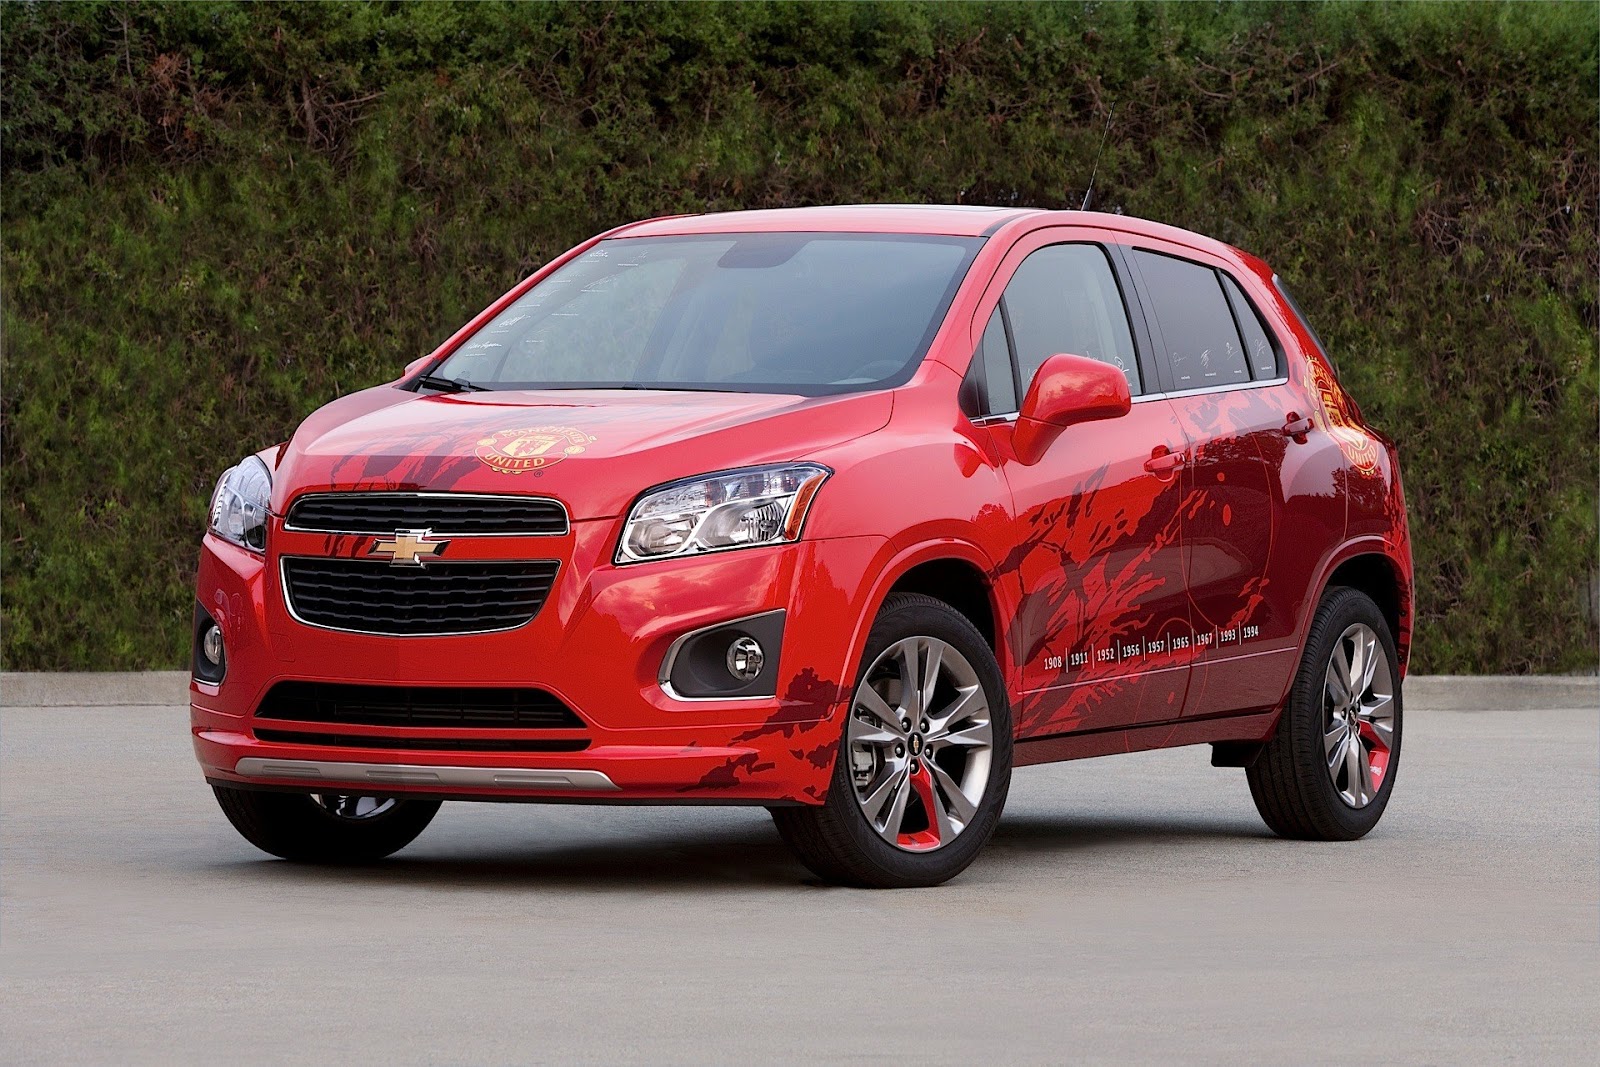 Chevrolet Trax Specification, Photos Cool Cars